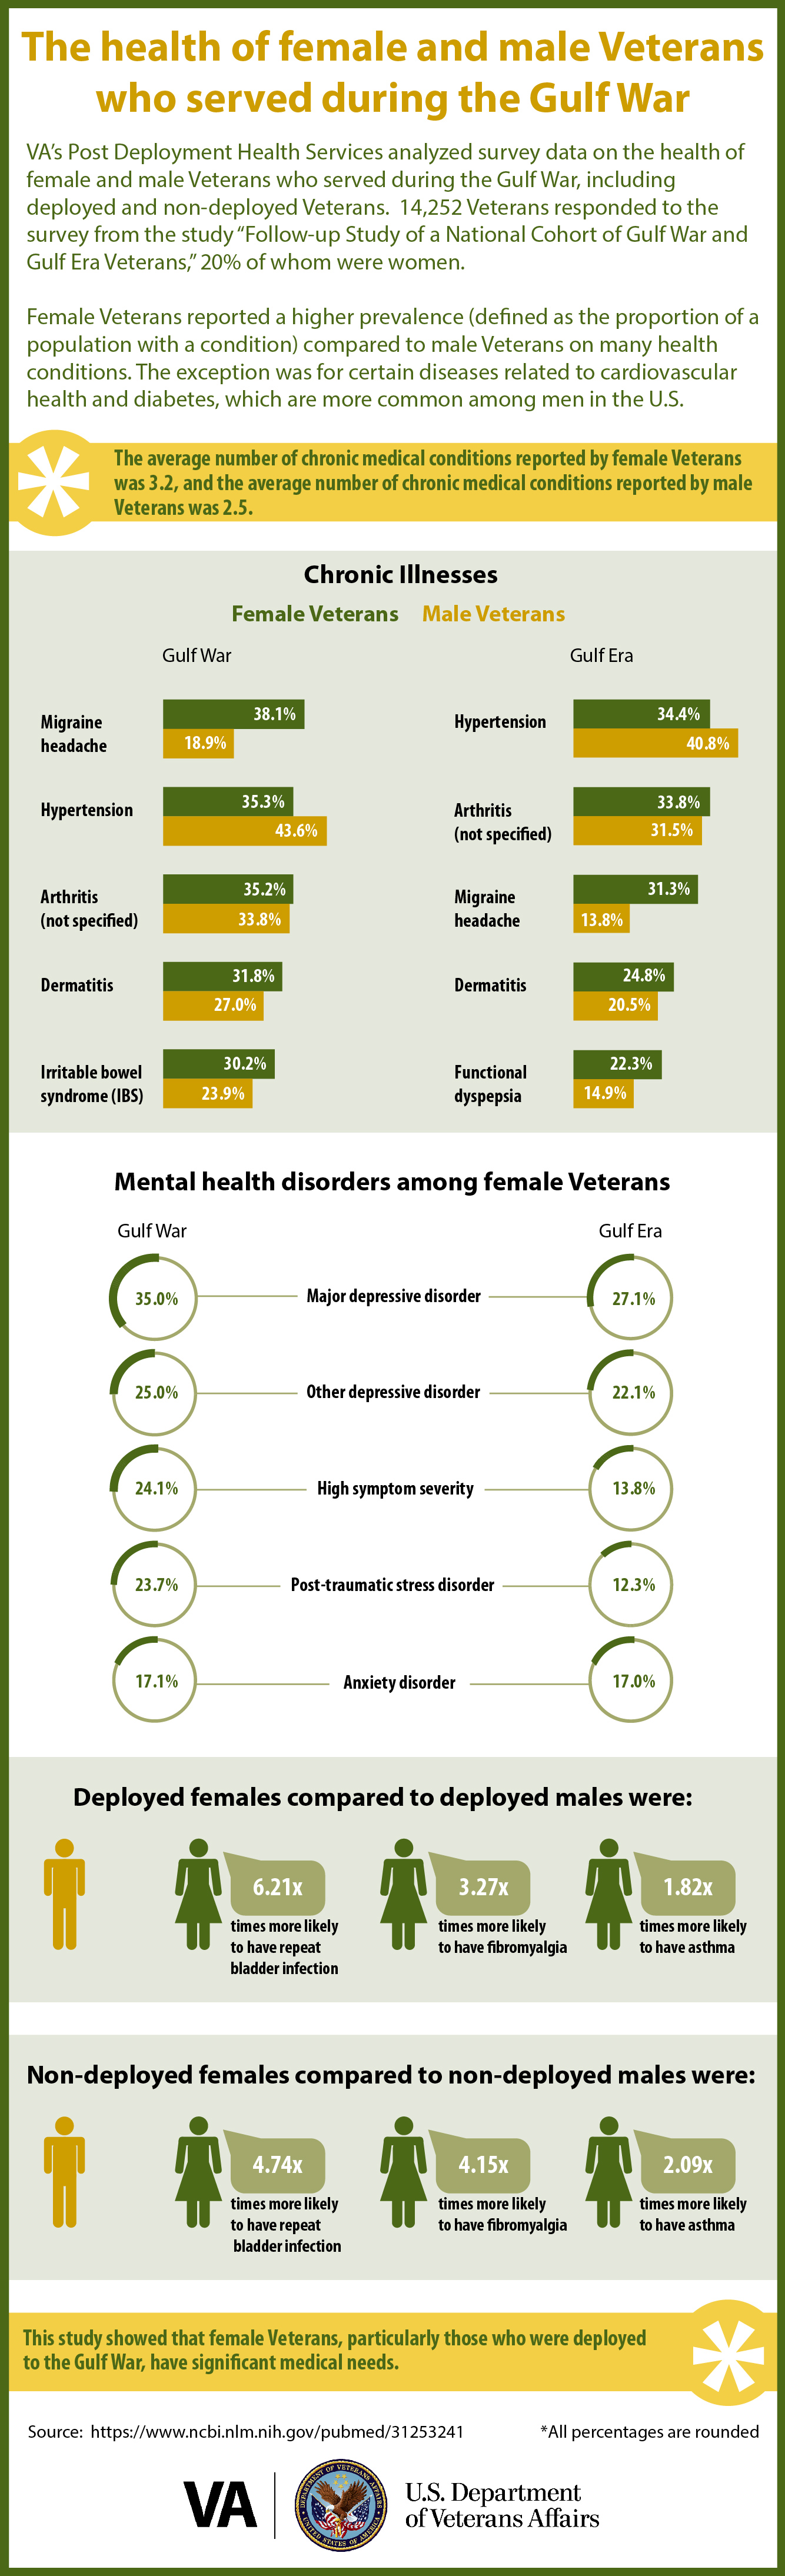 Infographic comparing the health of female and male Veterans during the Gulf War.